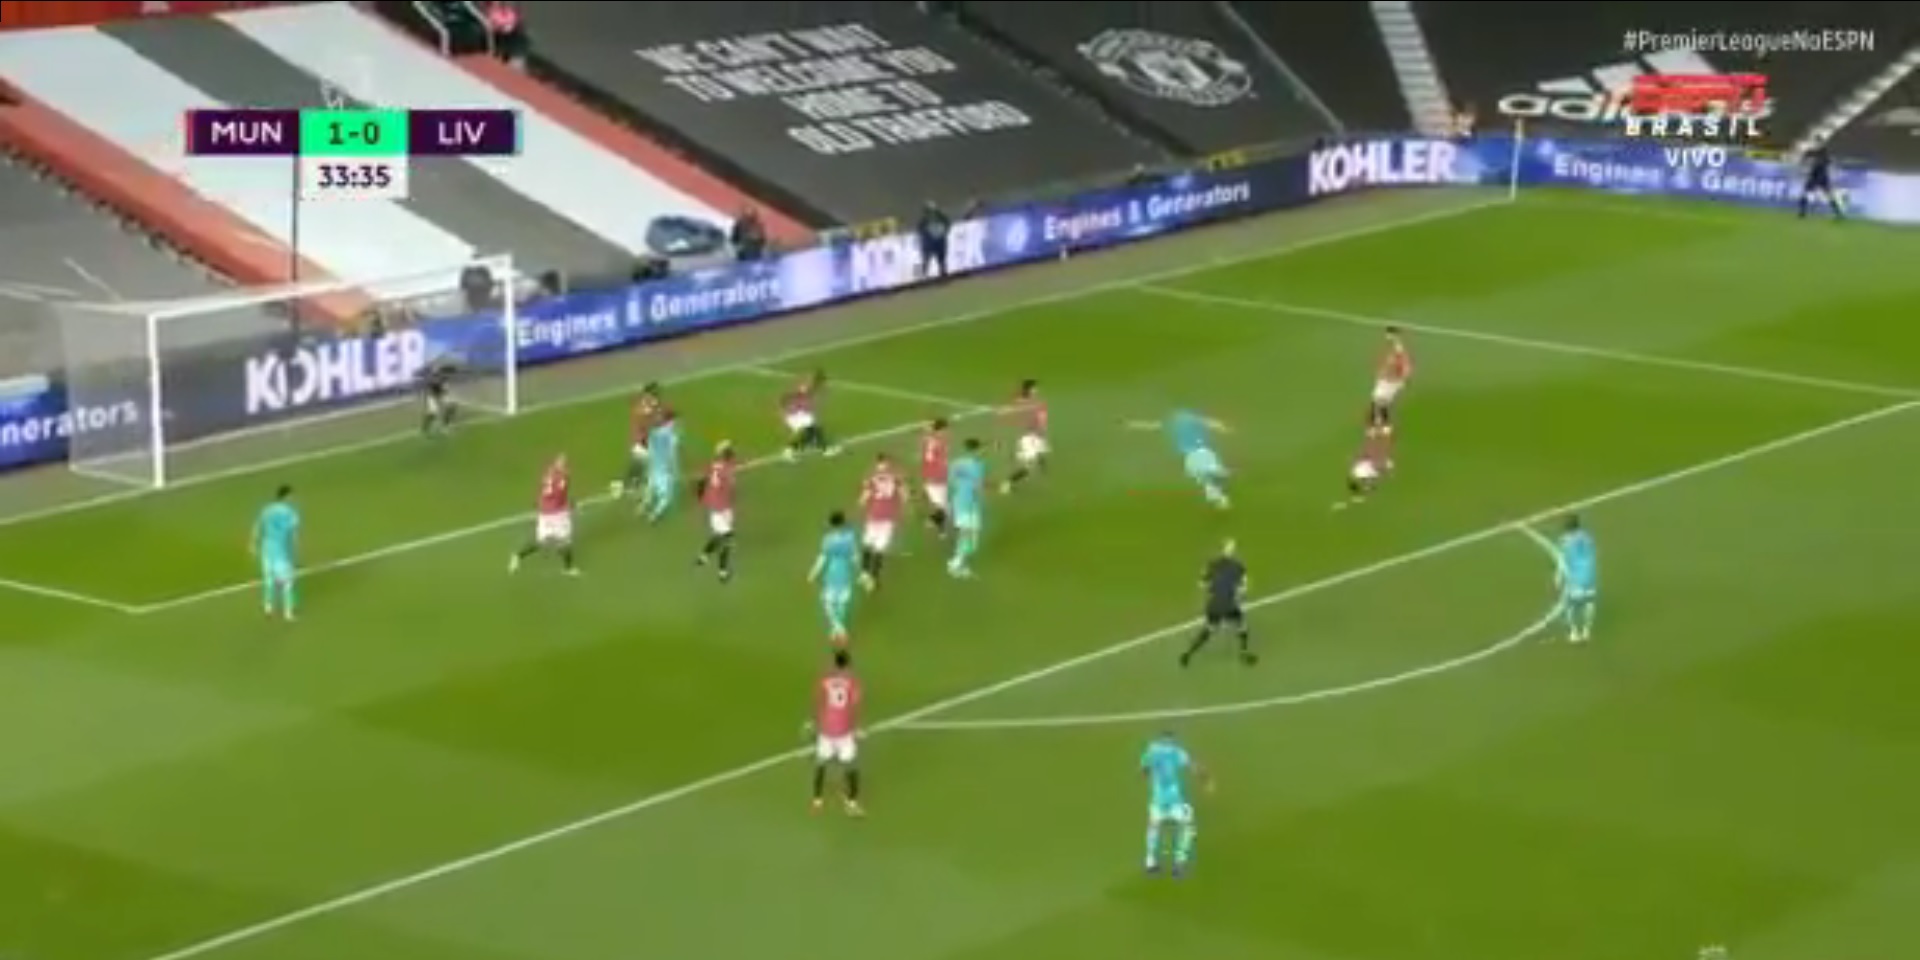 (Video) Diogo Jota equalises for Liverpool with brilliant strike at Old Trafford